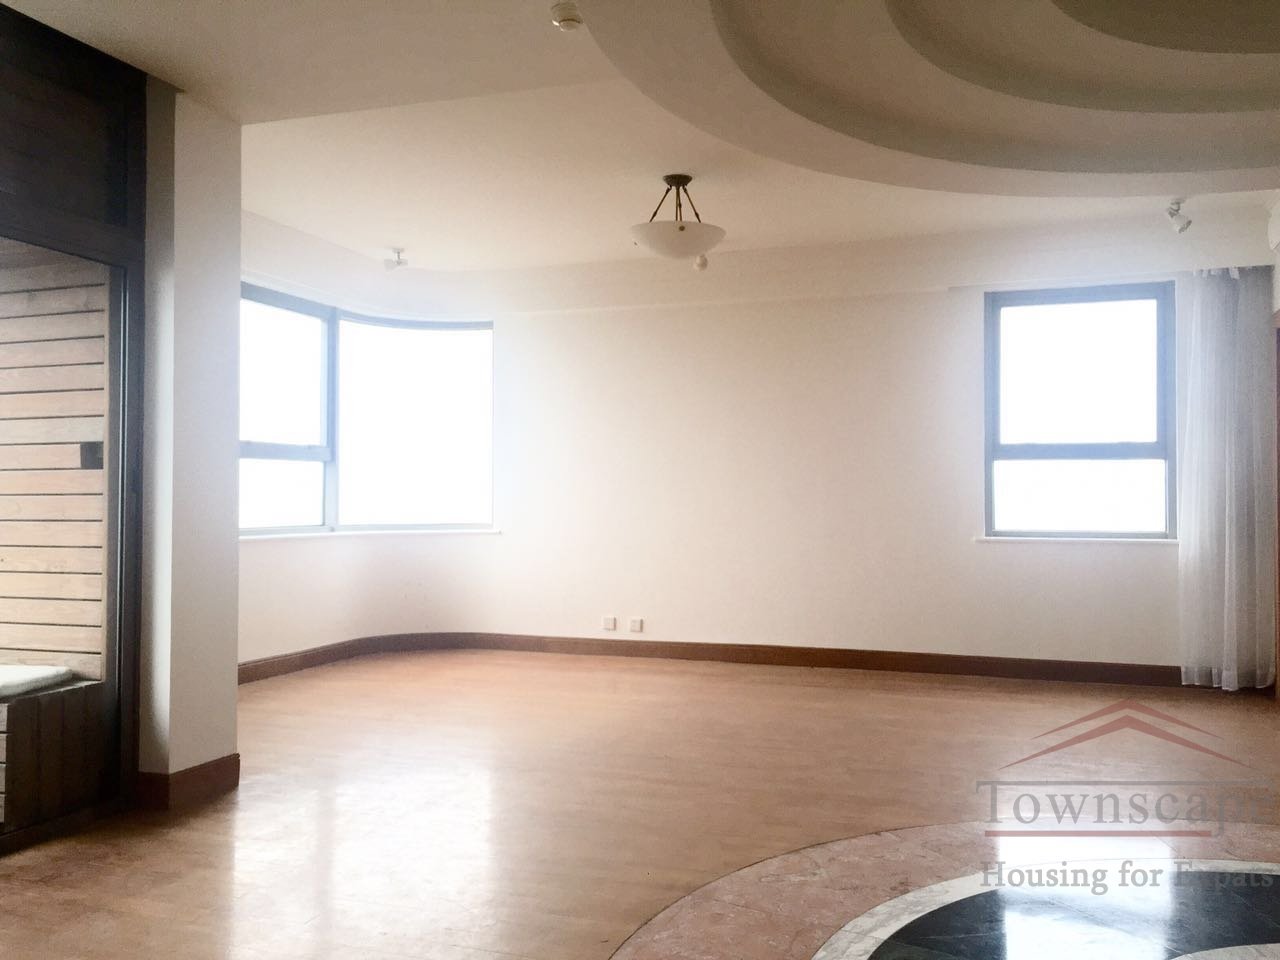 housing for expats, rent shanghai 4BR Apartment for rent